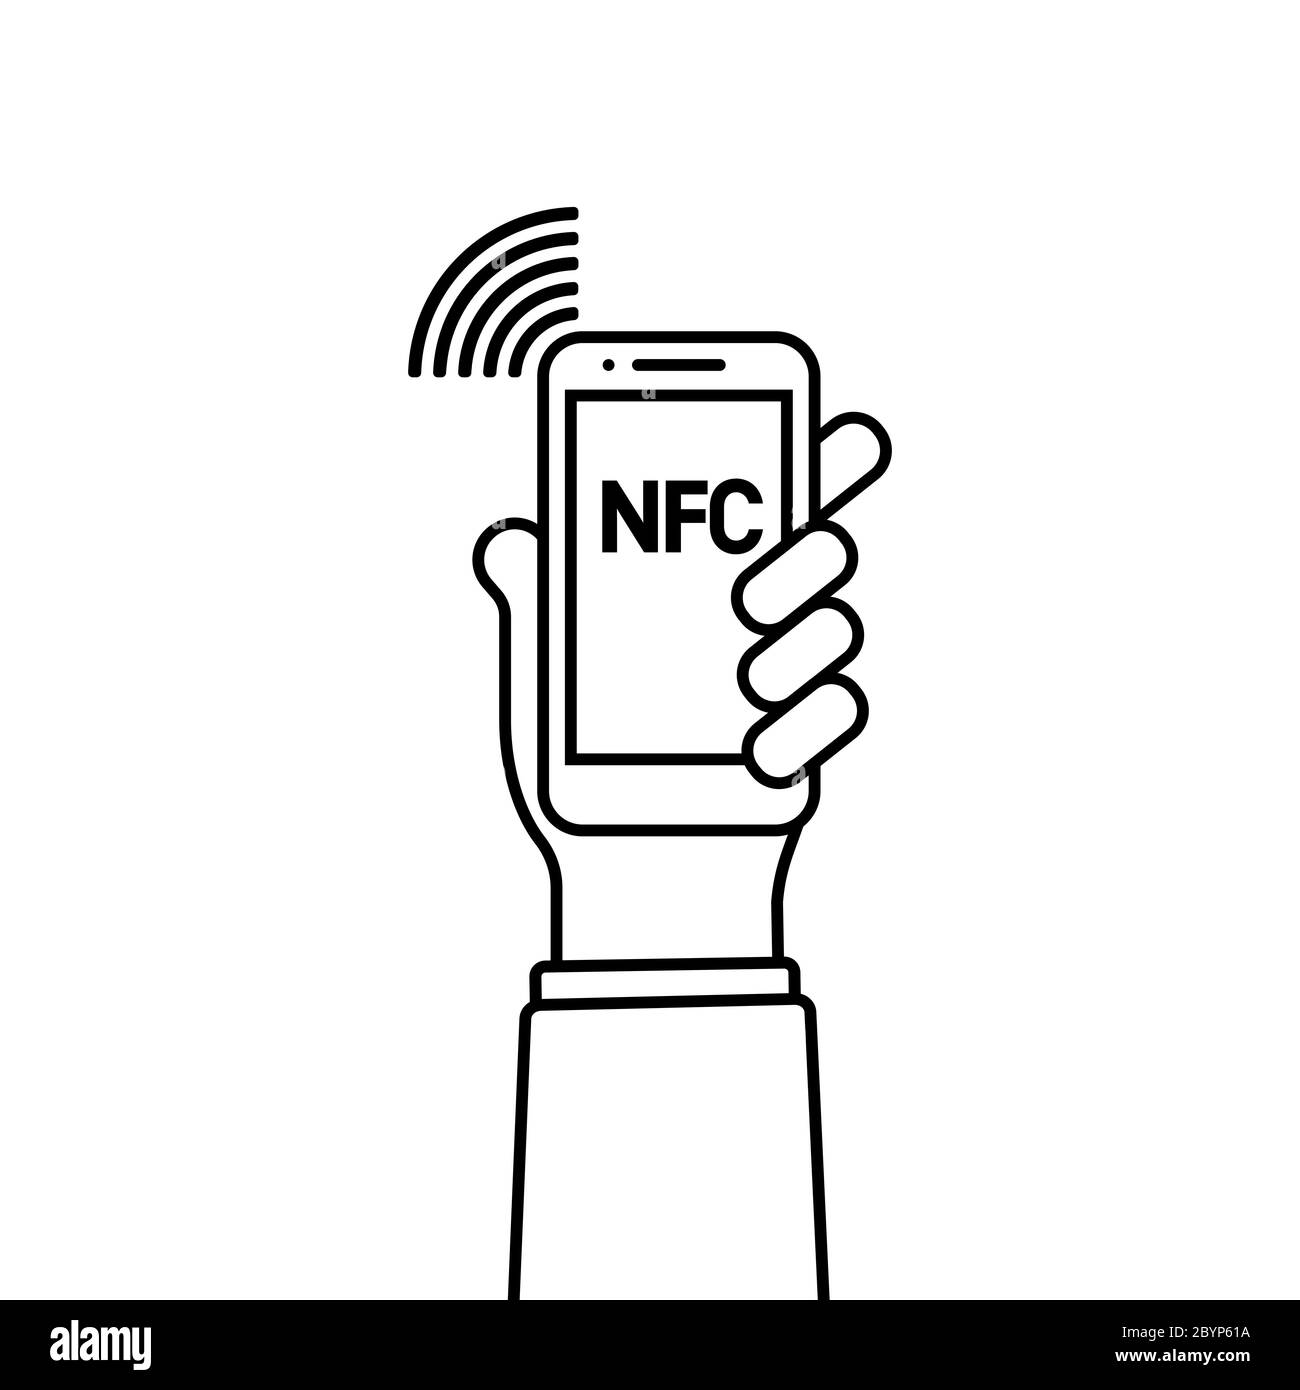 Hand holds phone NFC. Payment icon via NFC technology. Contactless card payment systems. Vector on isolated white background. EPS 10. Stock Vector